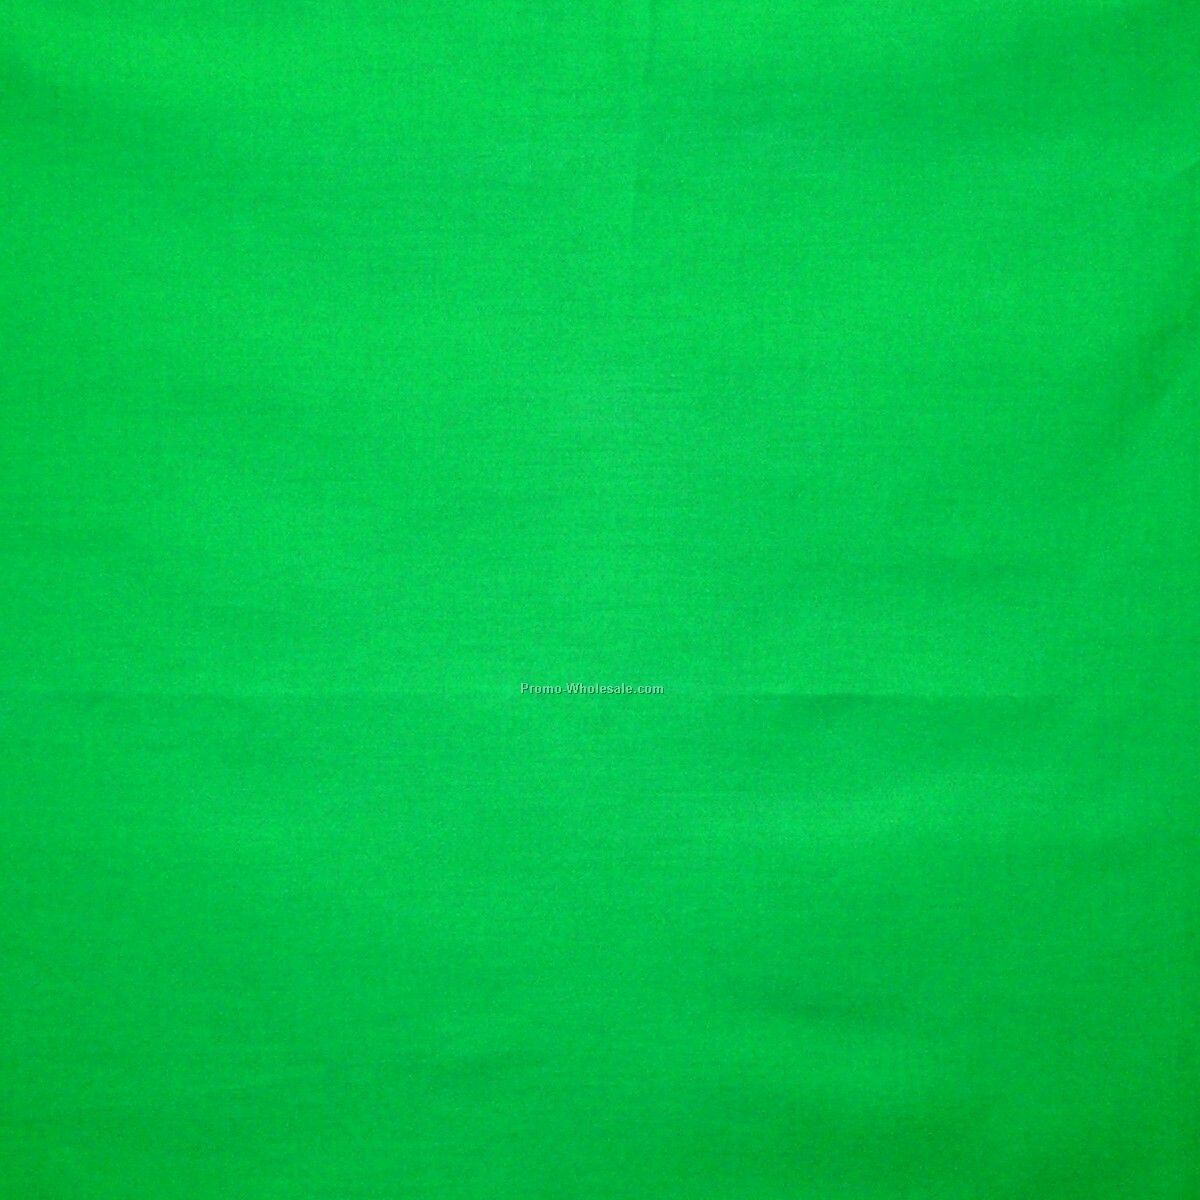 14"x14" Blank Solid Kelly Green Imported 100% Cotton Handkerchiefs